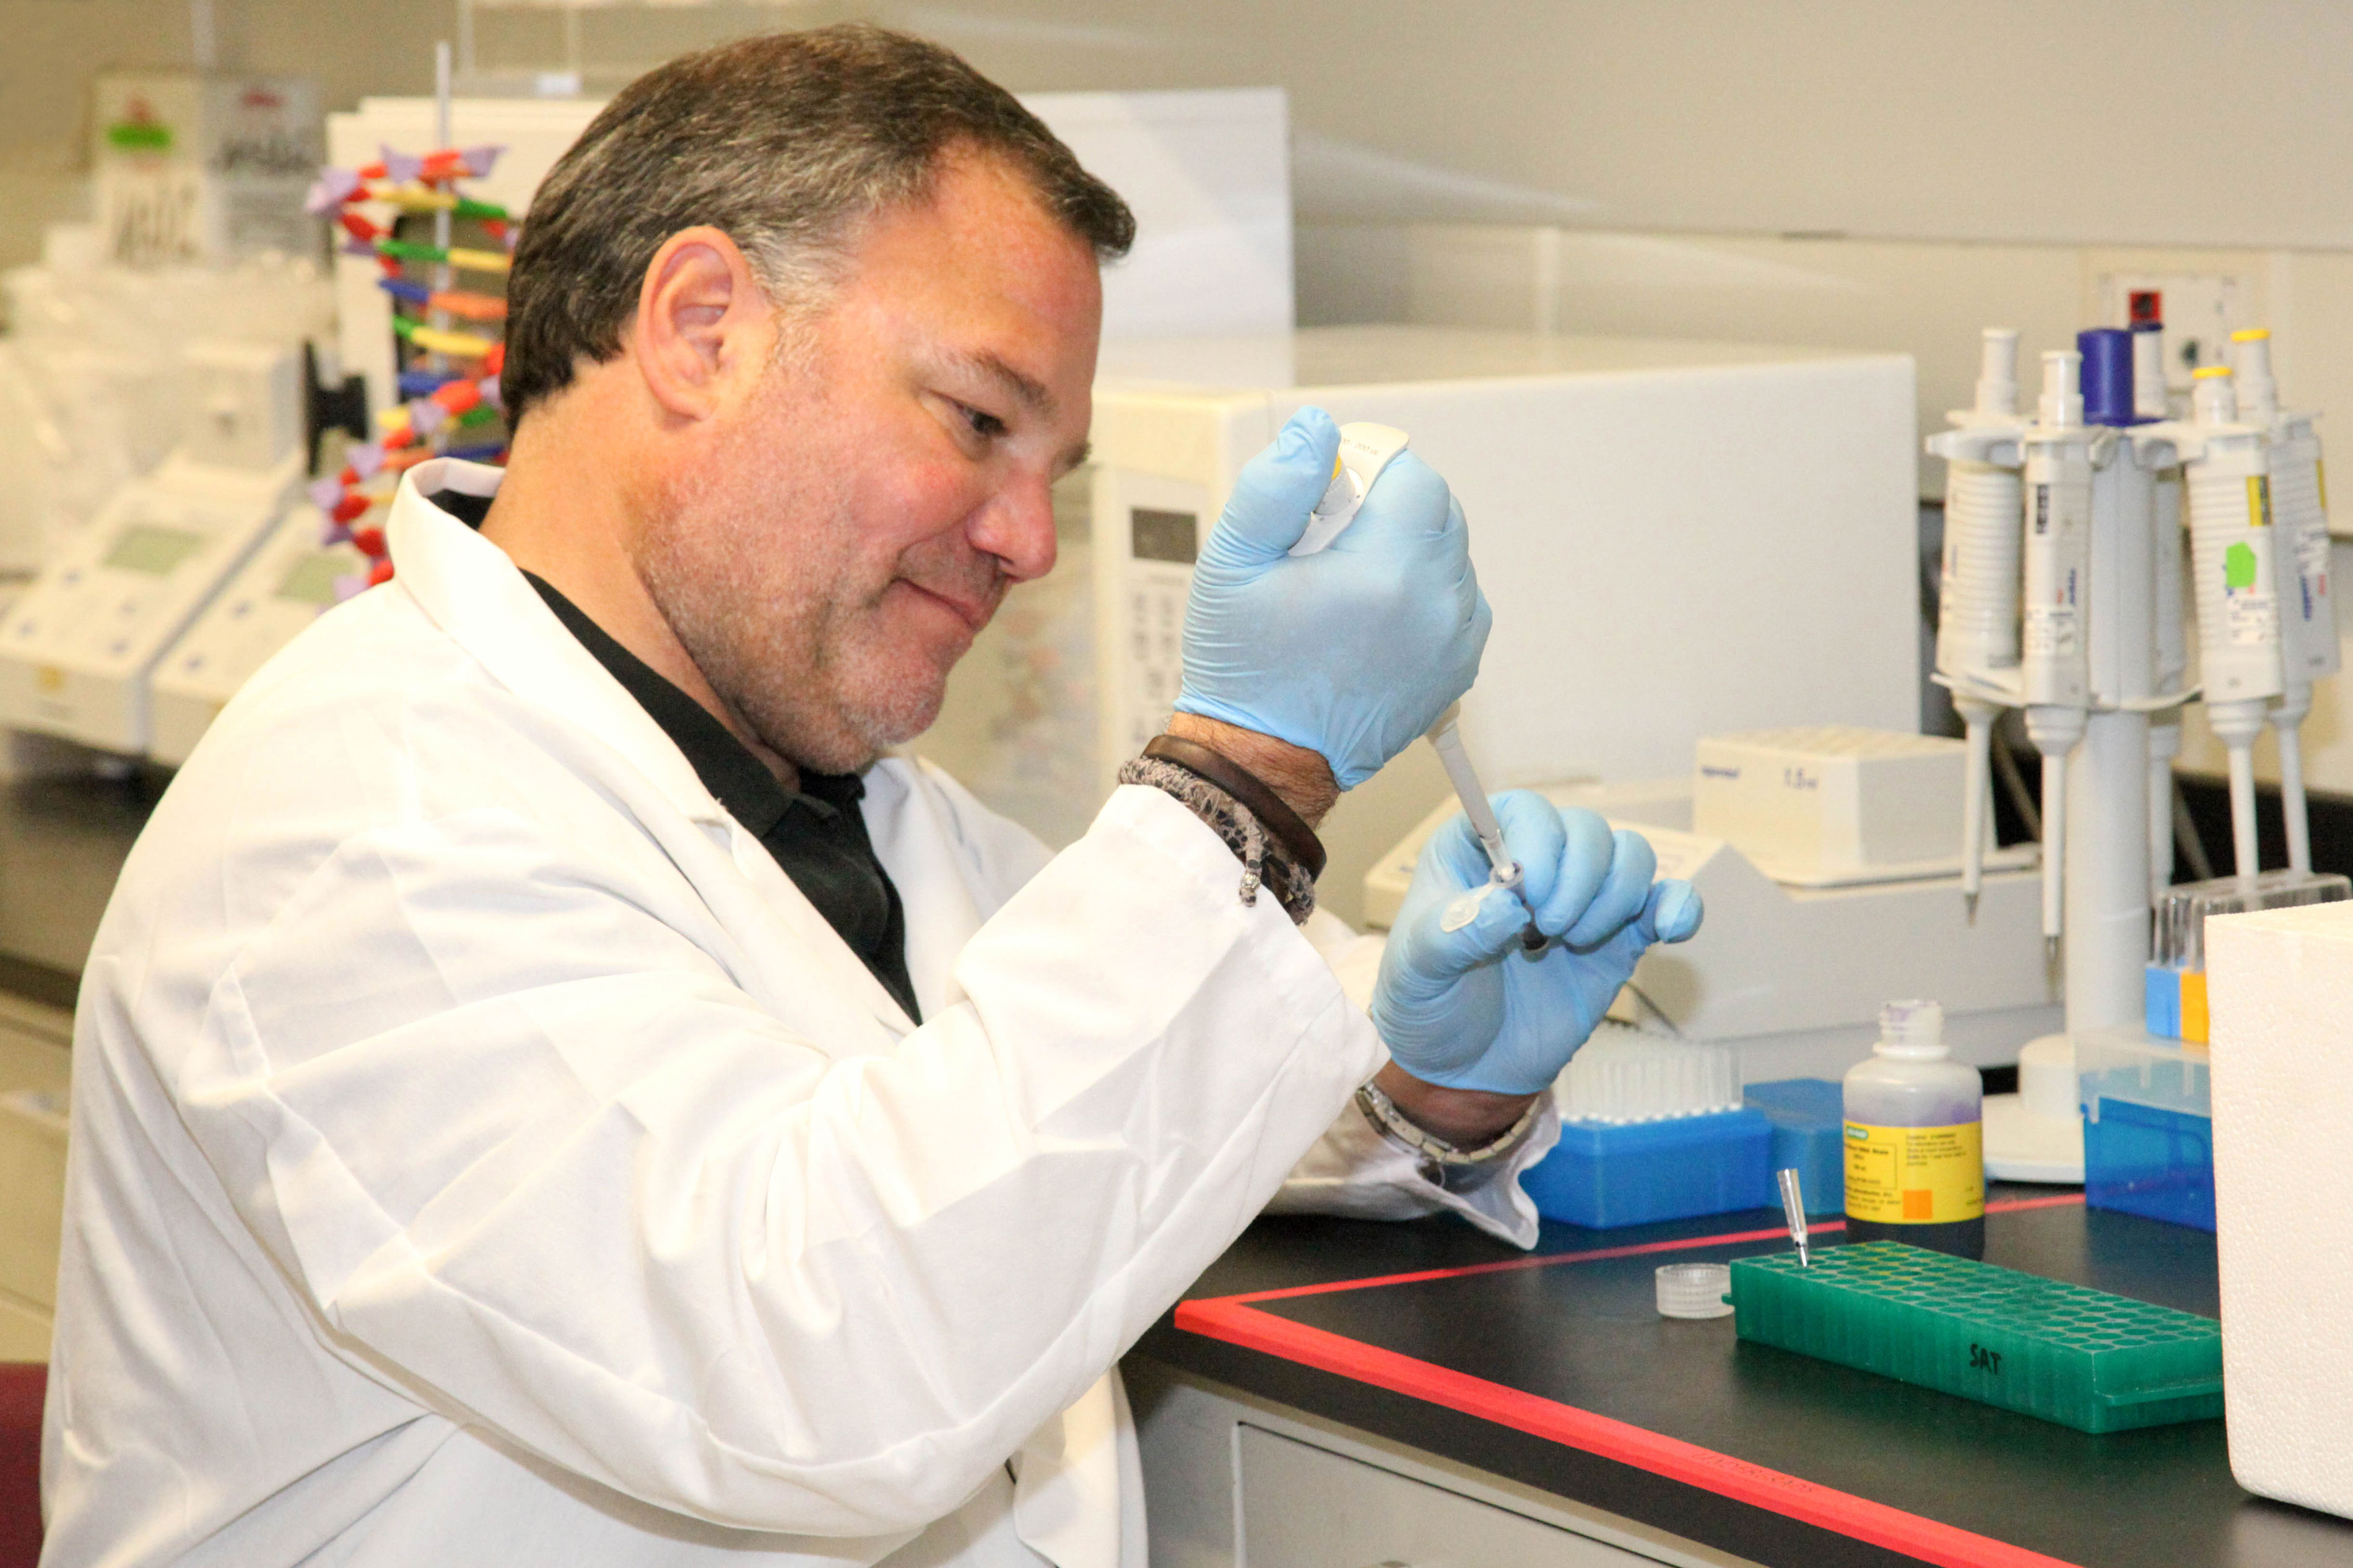 A researcher in a white lab coat and blue protective gloves uses an instrument inside a lab.